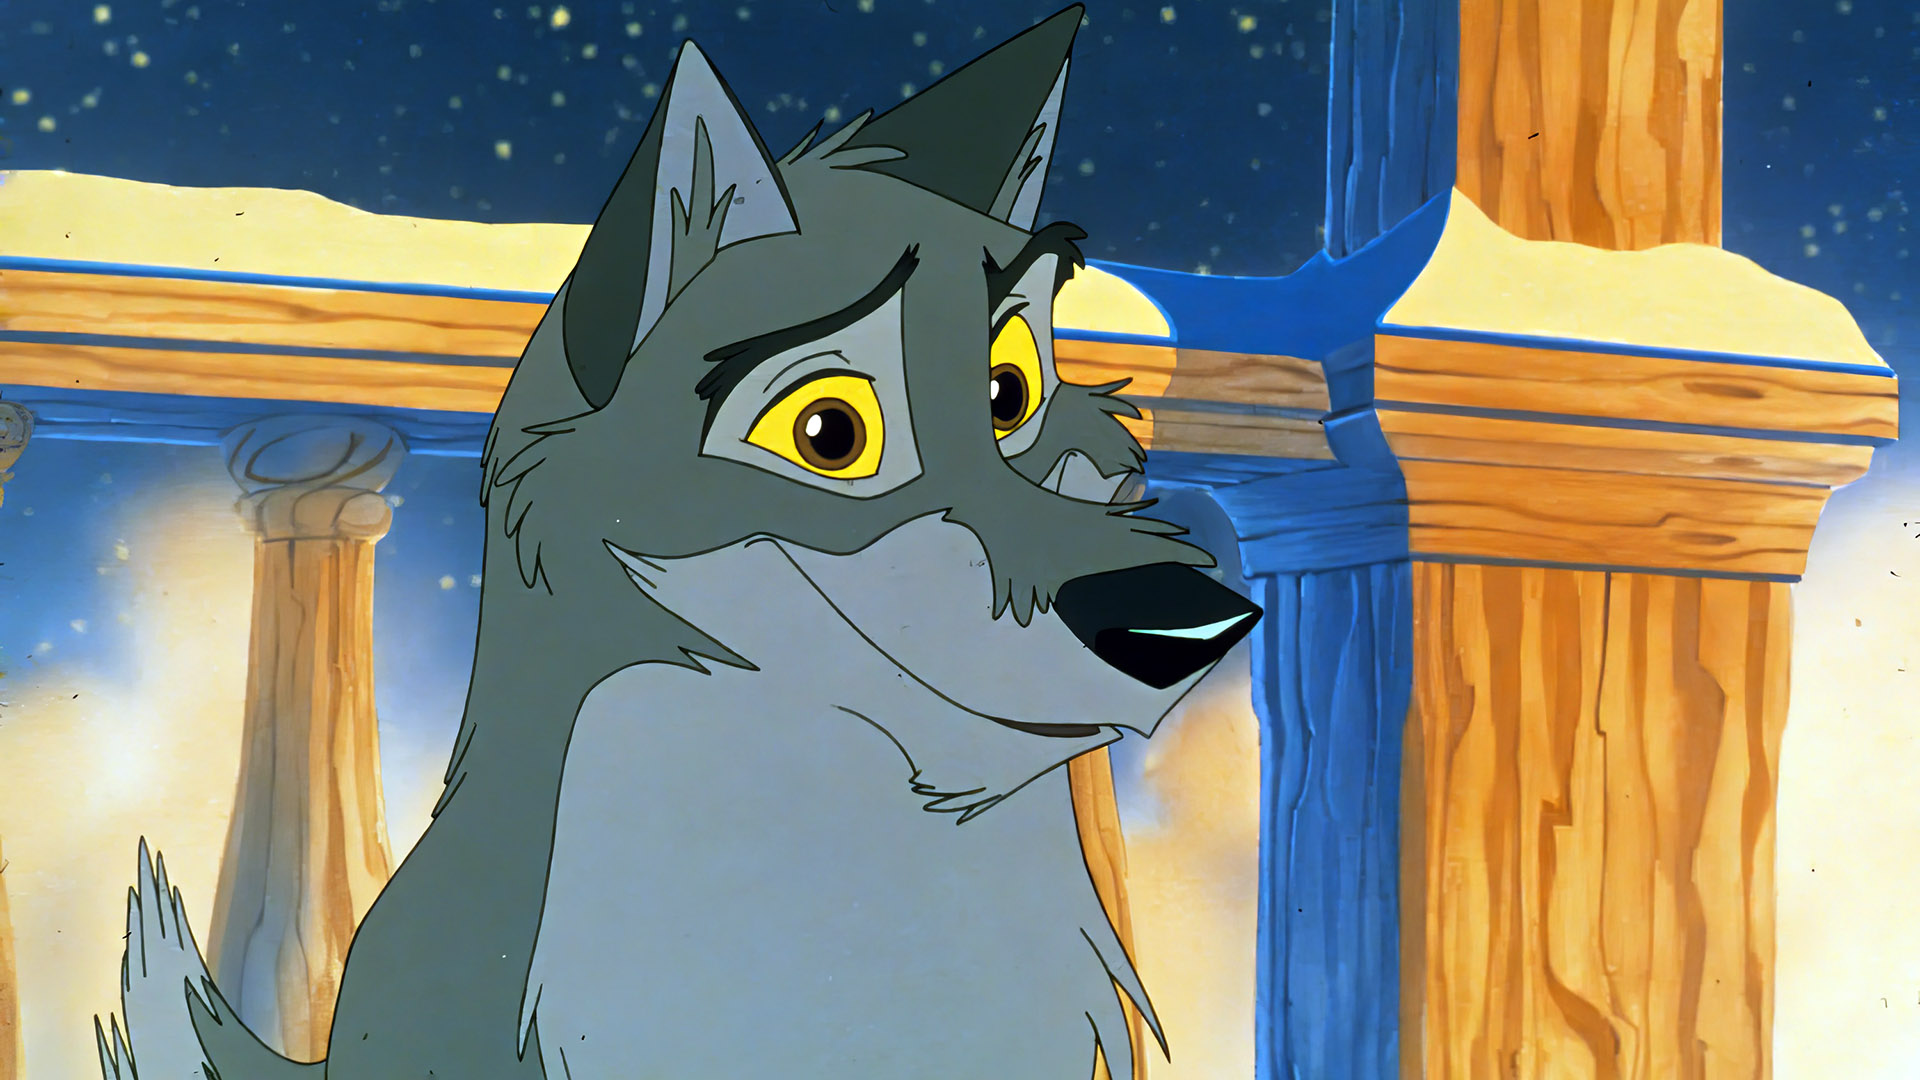 10 Underrated Animated Movies from the '90s You've Missed